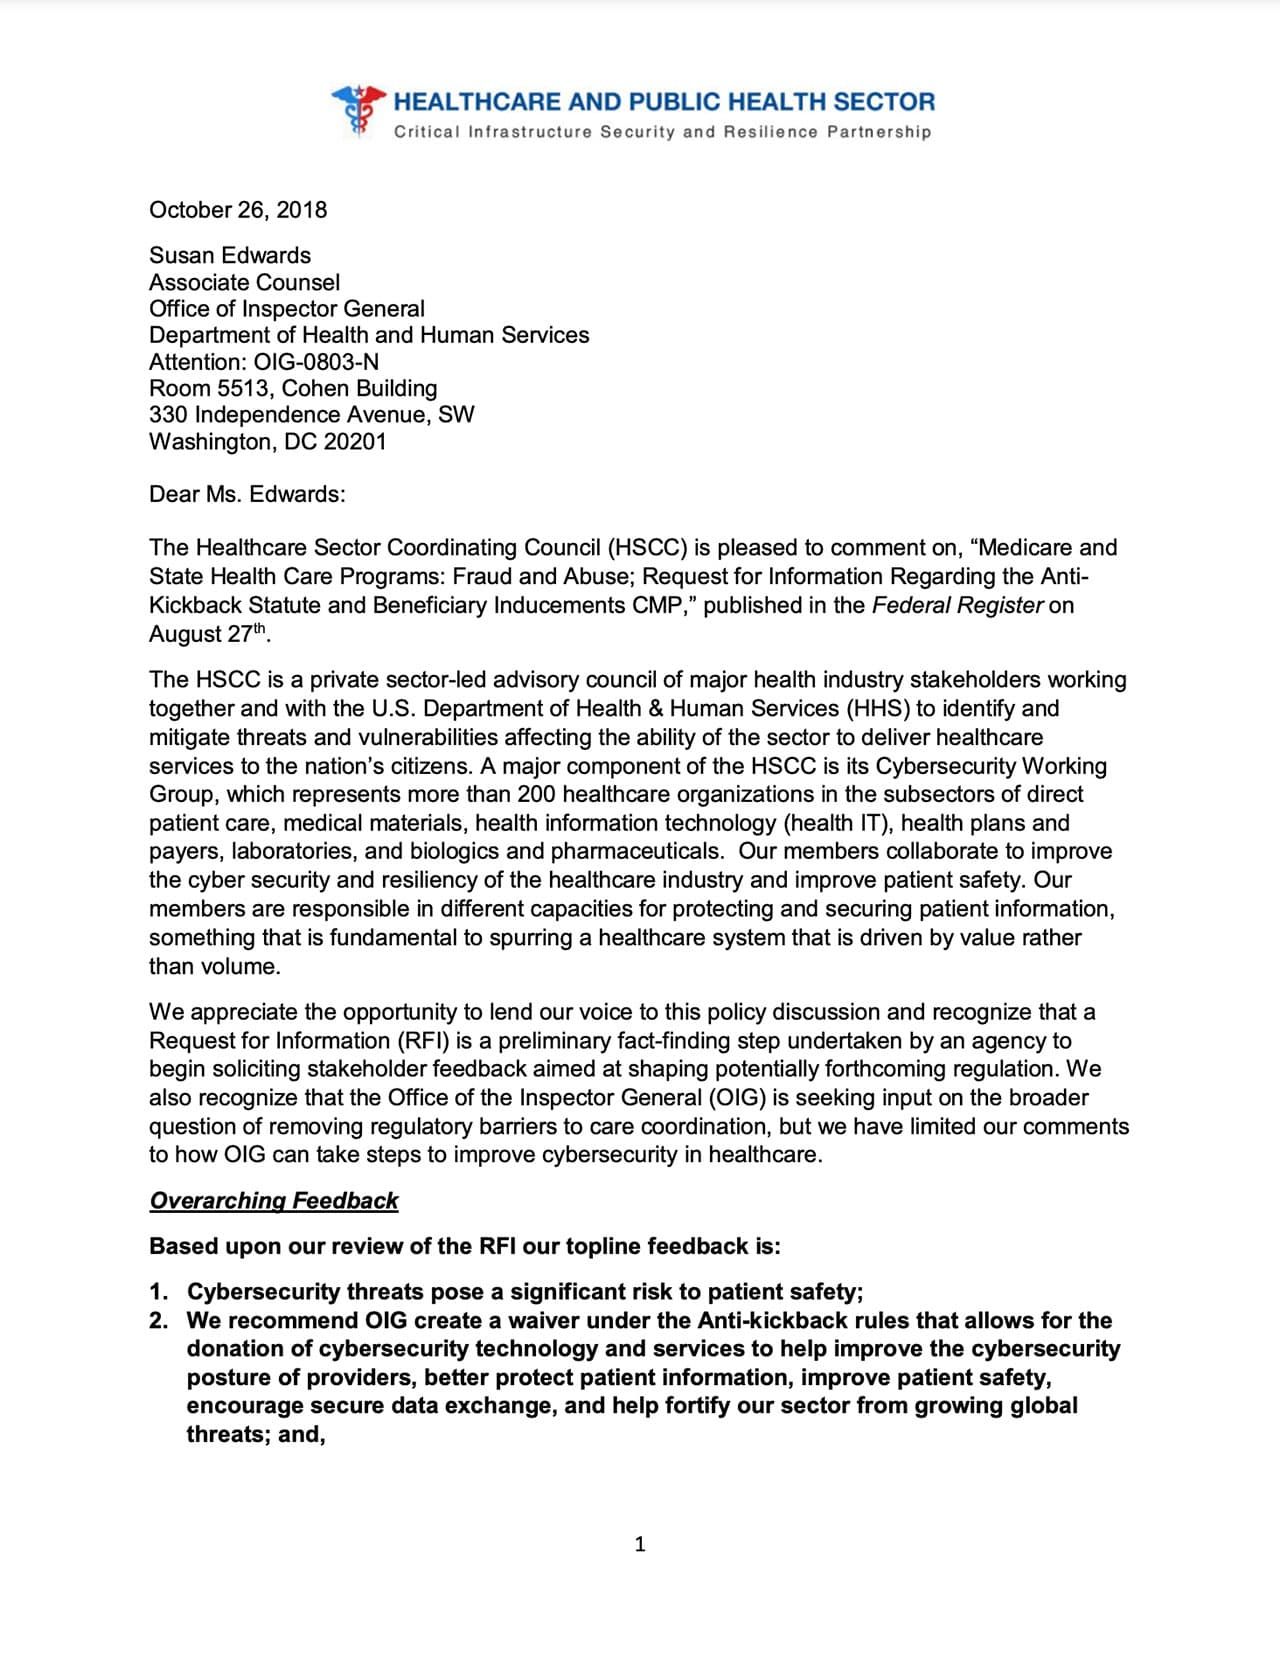 HPH SCC Cybersecurity Working Group Comments on HHS OIG Anti-Kickback Statute RFI